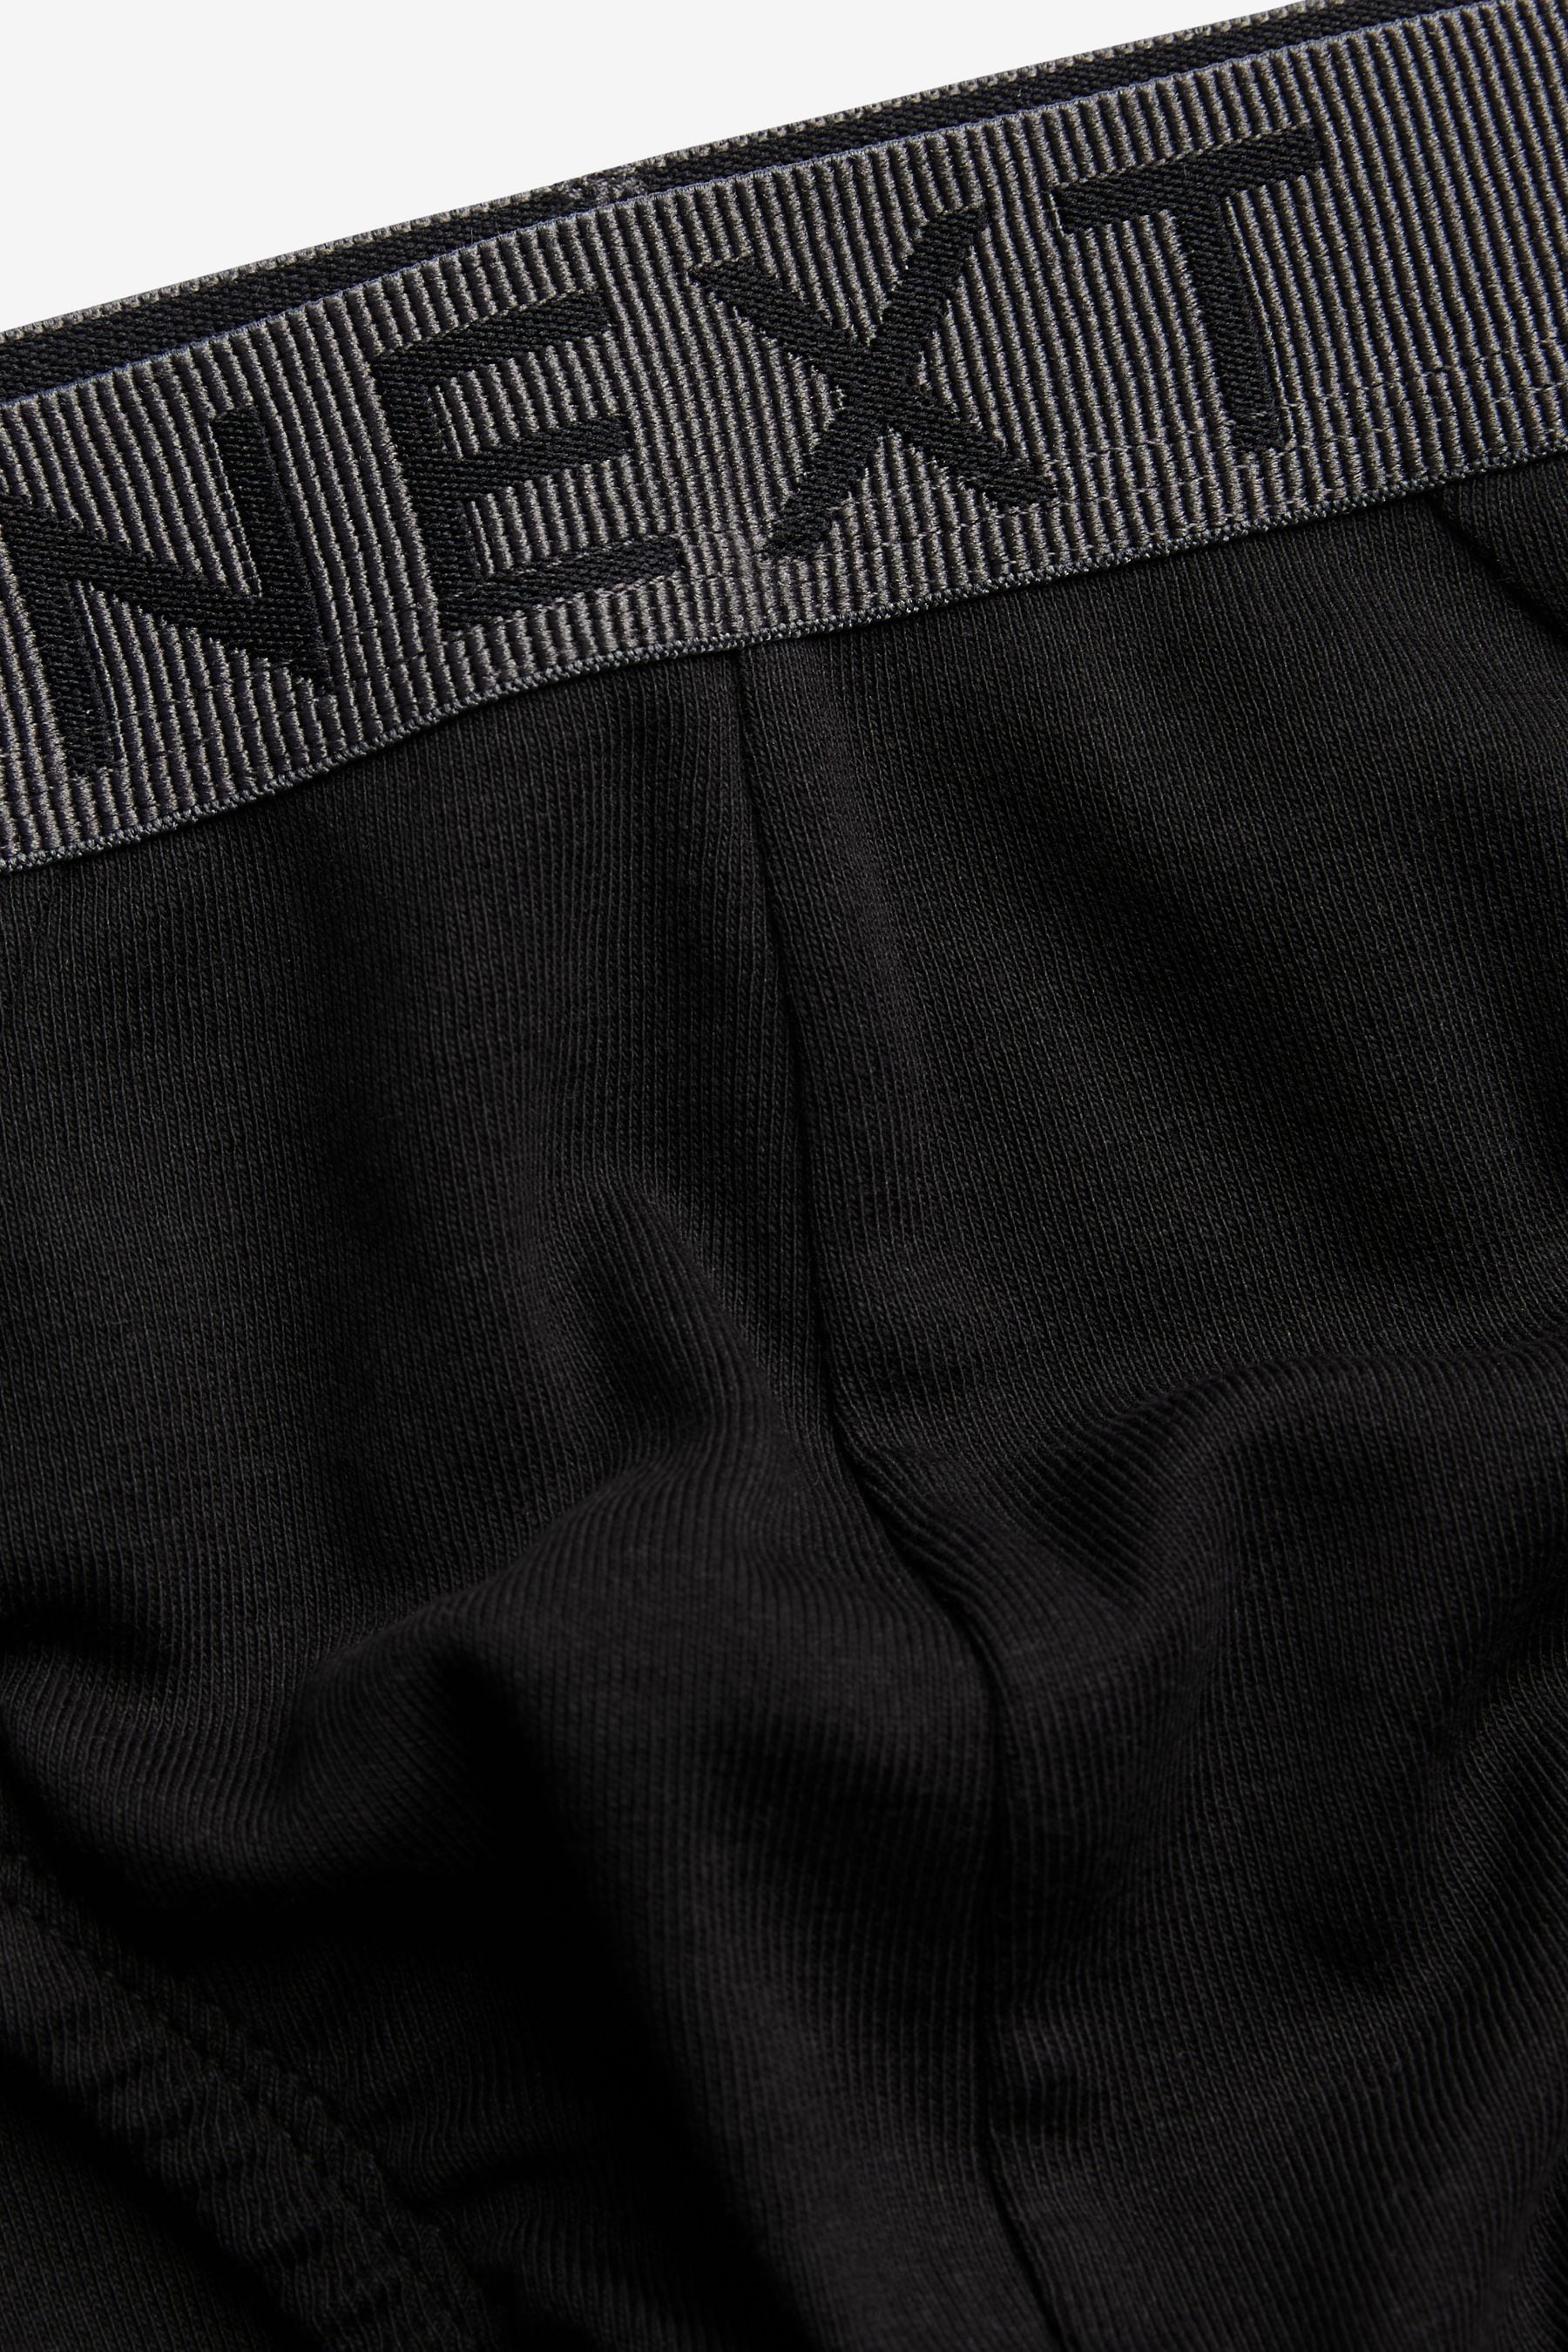 Buy Black Briefs Pure Cotton Four Pack from the Next UK online shop